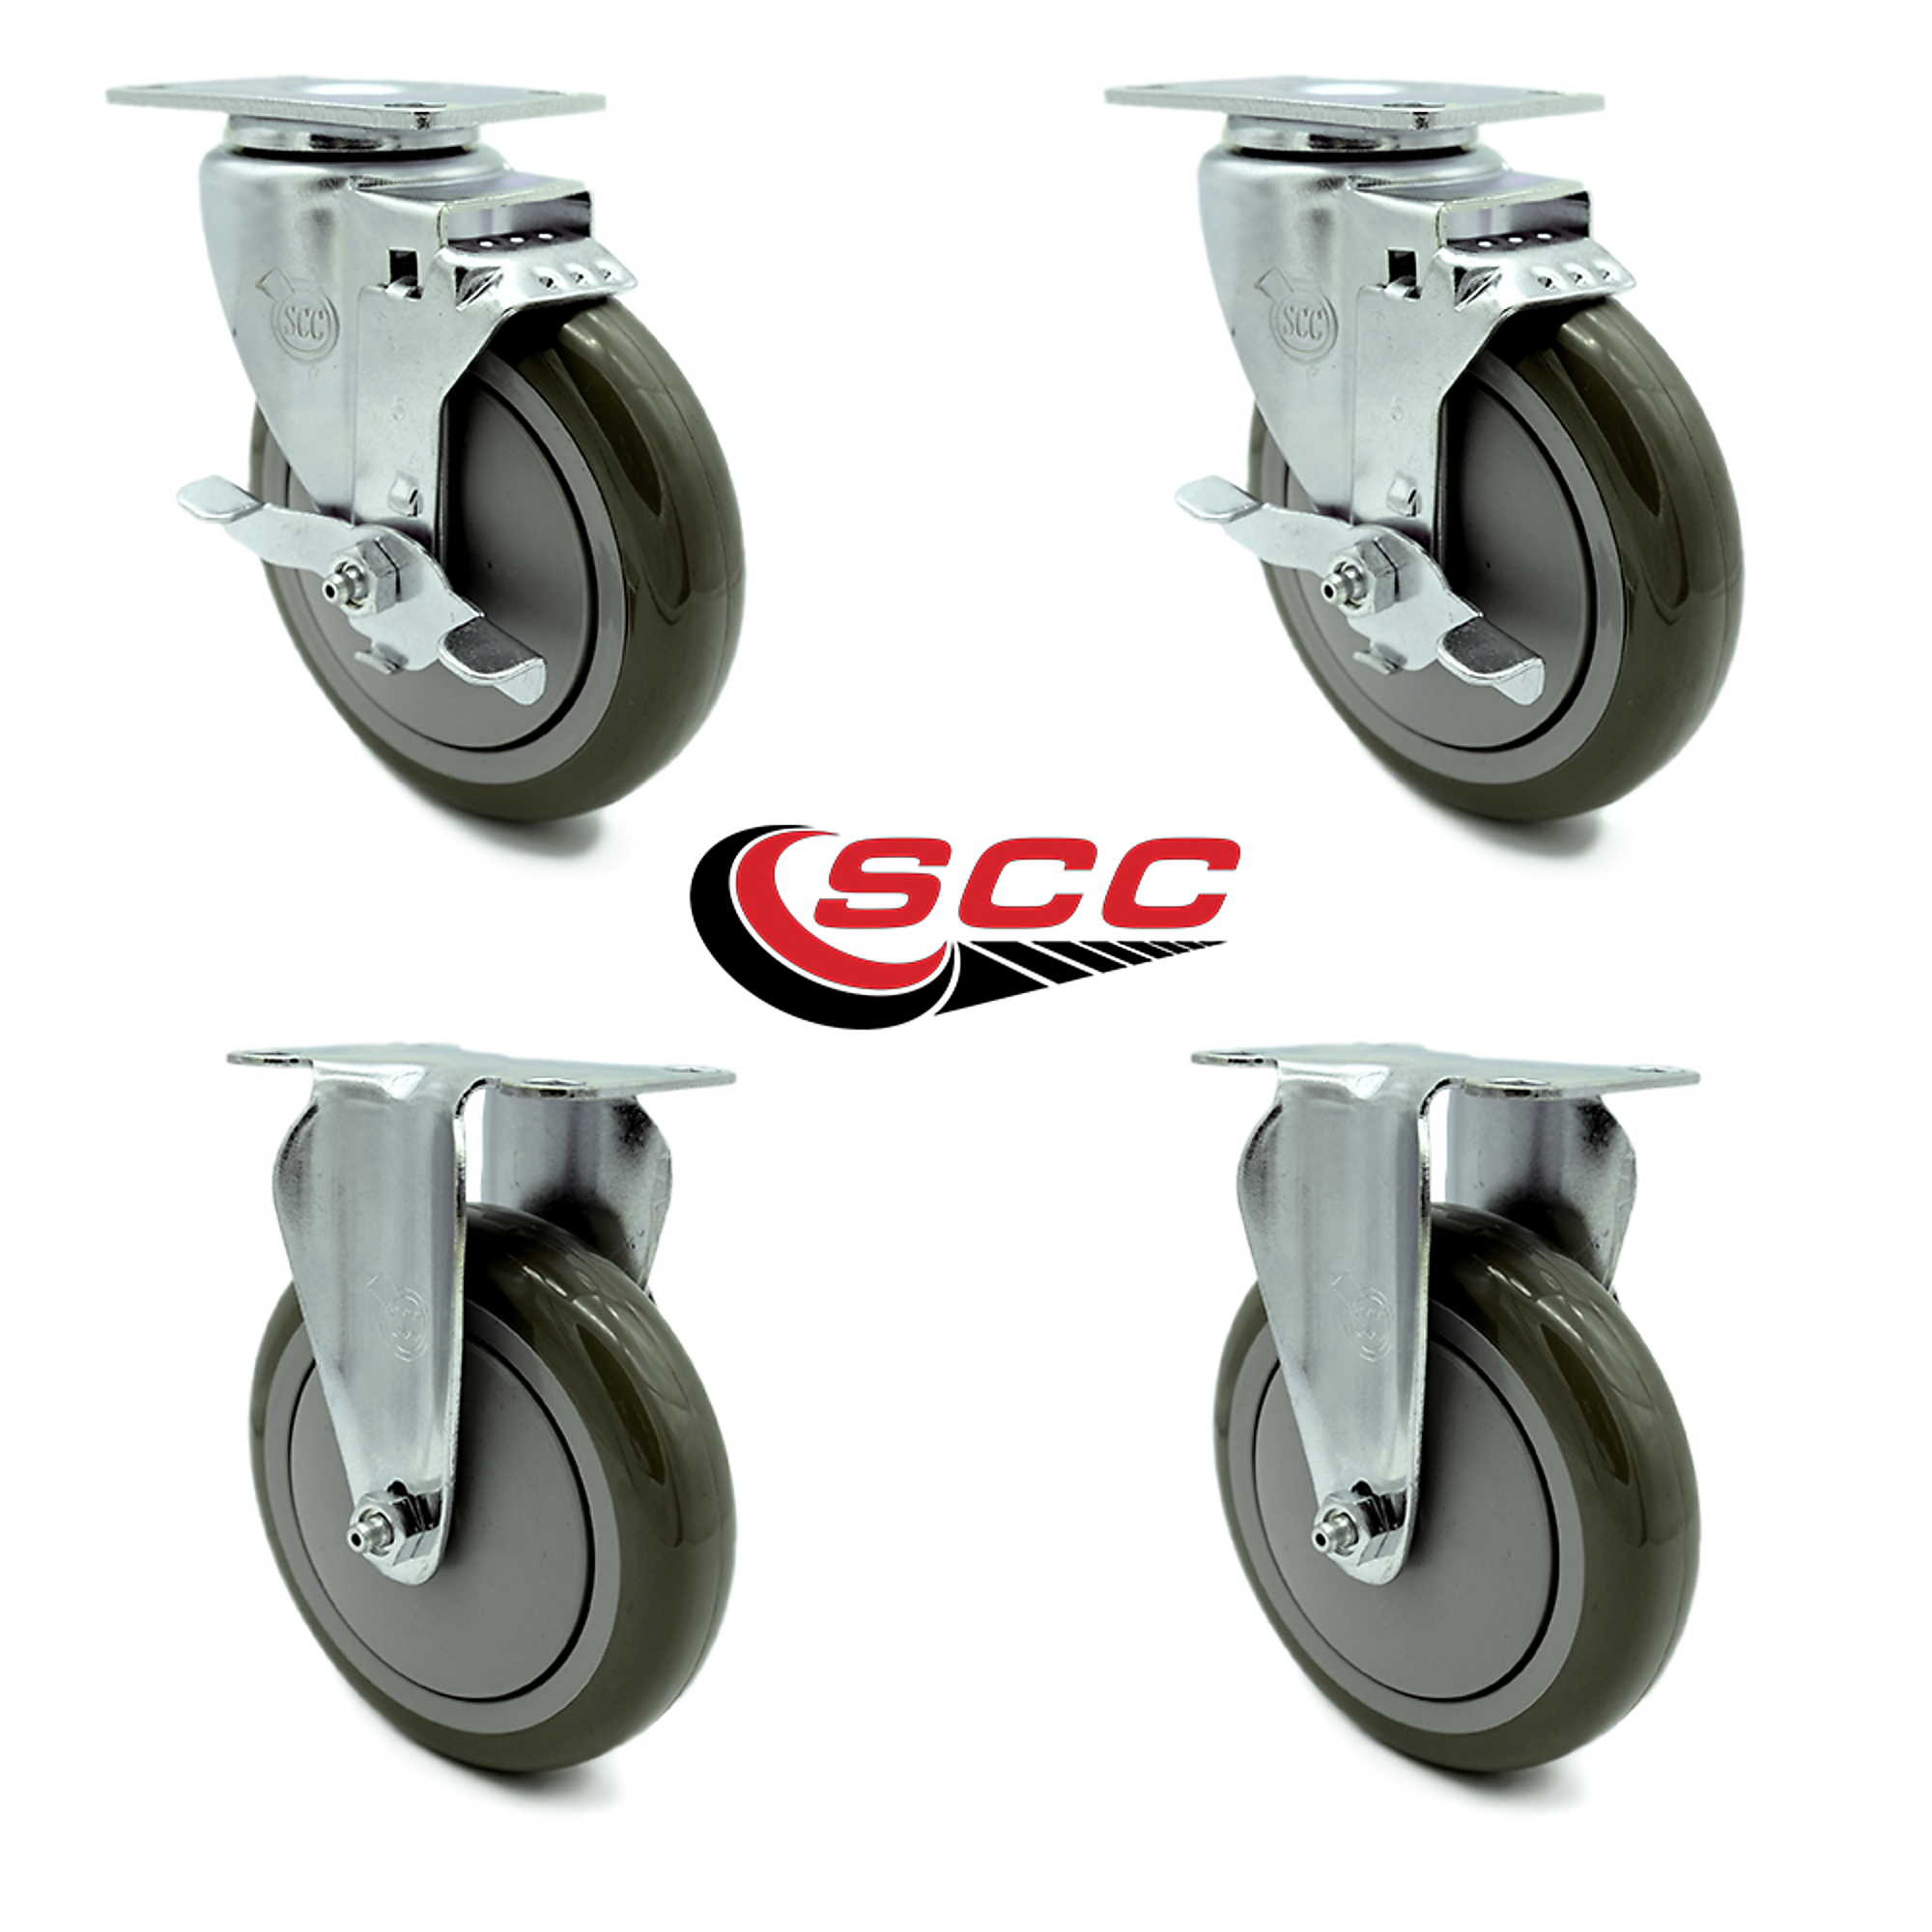 Service Caster, 5Inch x 1 1/4Inch Plate Casters, Wheel Diameter 5 in, Caster Type Swivel, Package (qty.) 4, Model CAM-SCC-20S514-PPUB-TLB-2-R514-2 -  734005058550